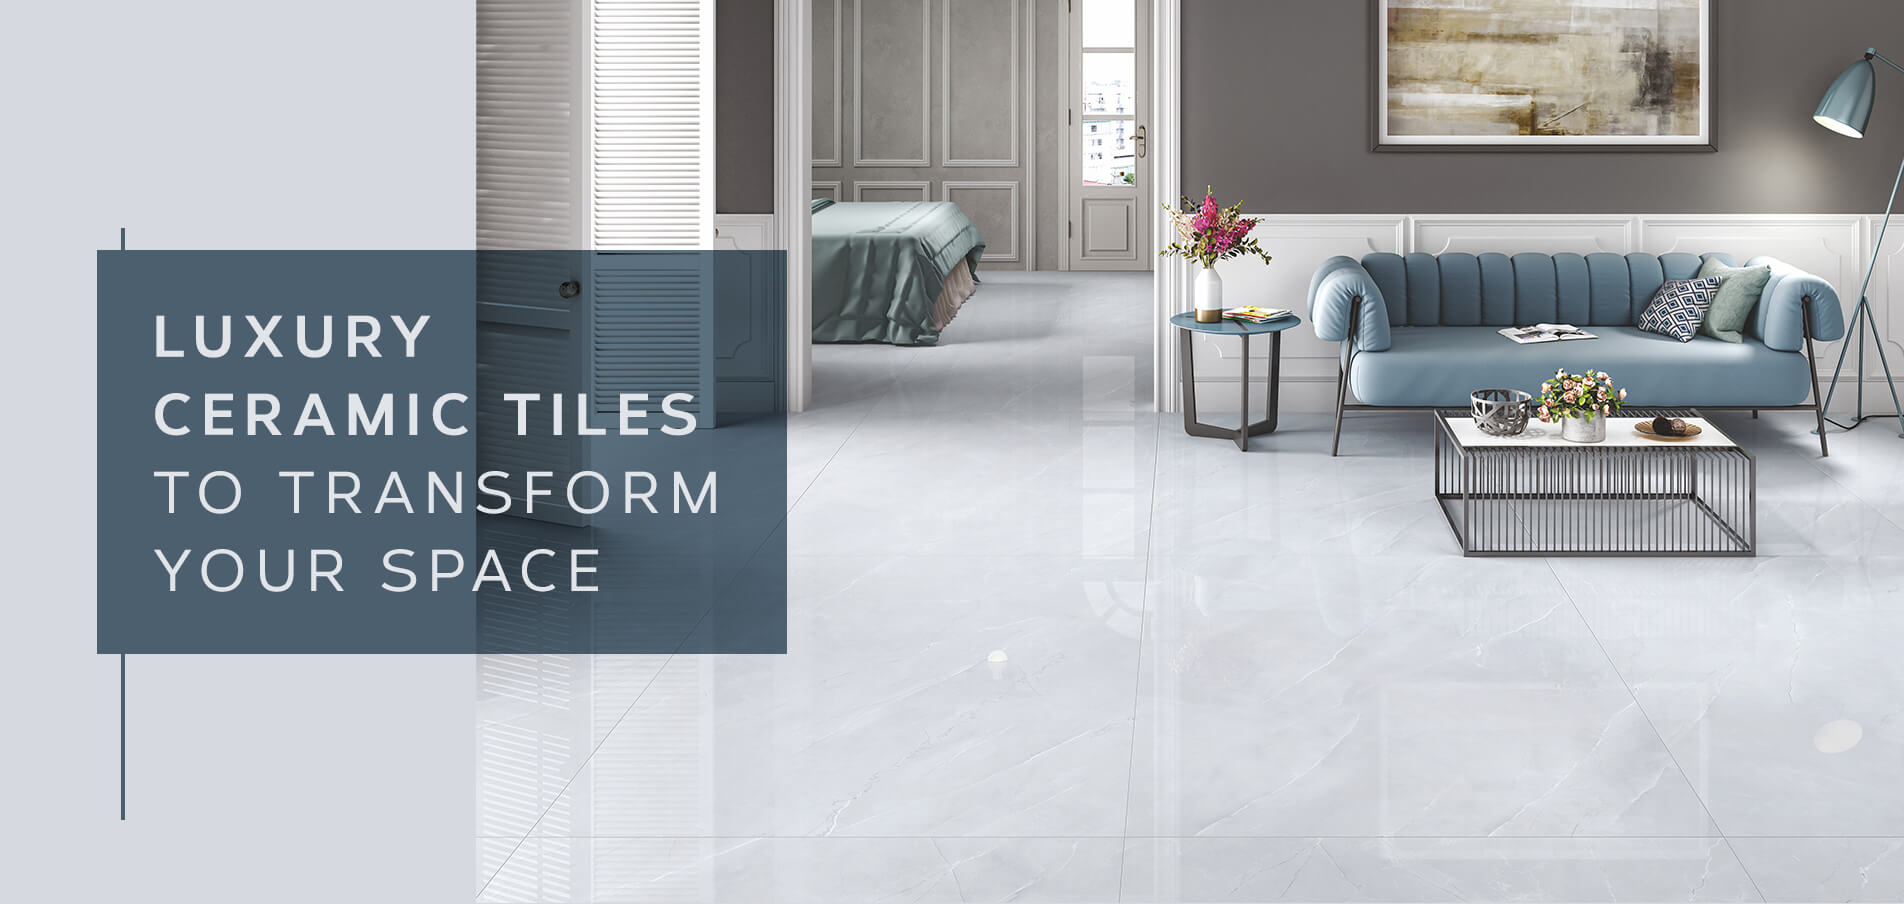 Luxury Ceramic Tiles To Transform Your Space